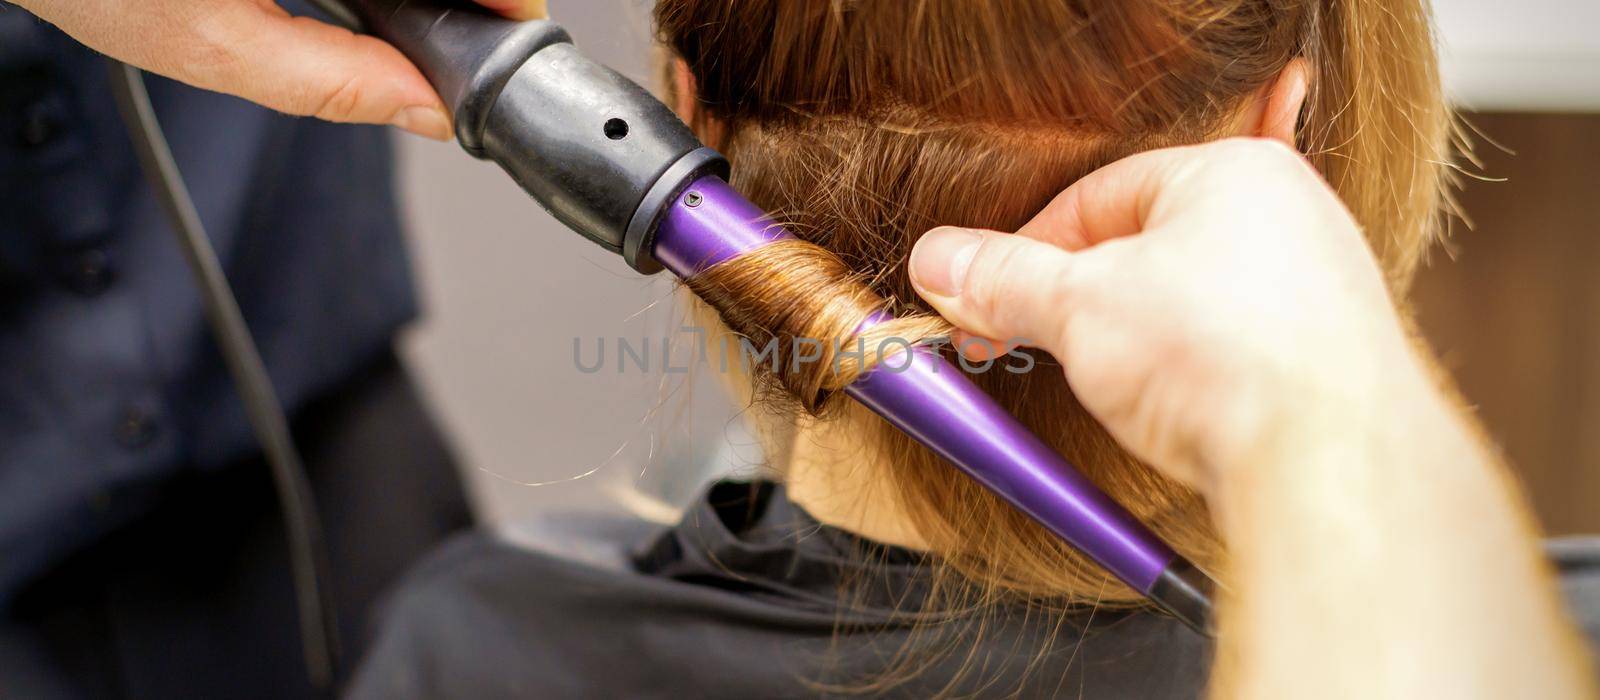 Close up of hairstylist's hands using a curling iron for hair curls in a beauty salon